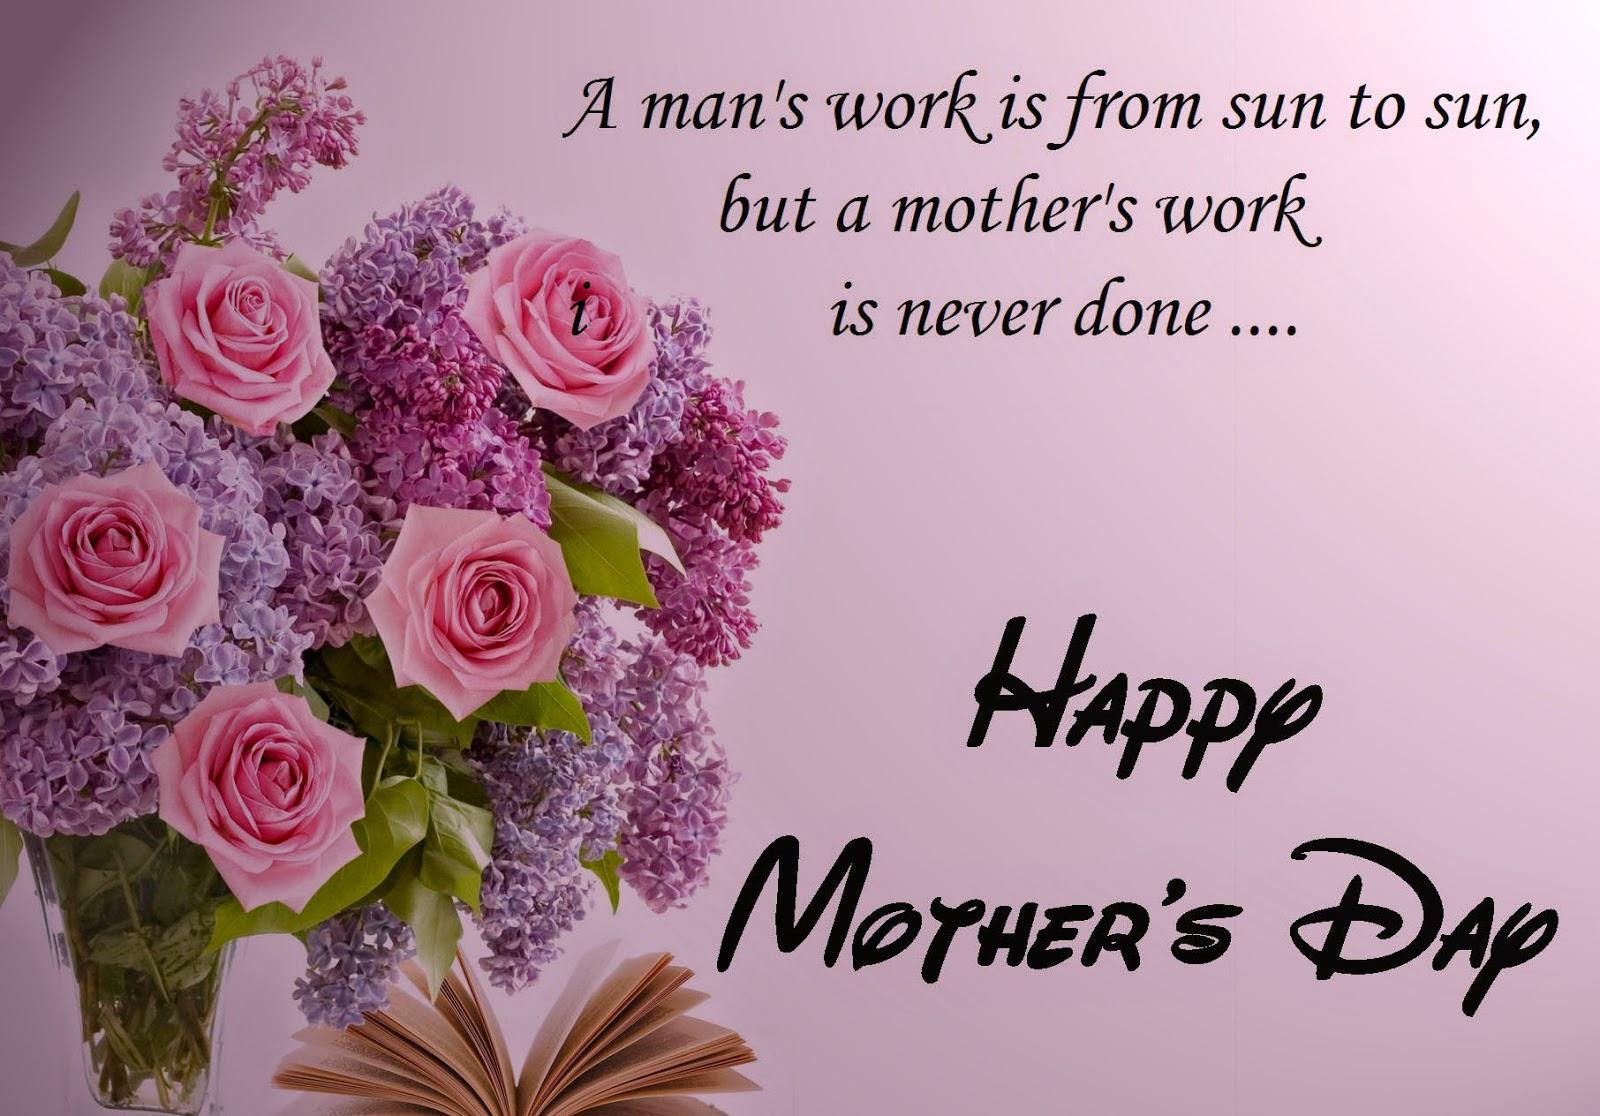 Happy Mother's Day Greetings Wallpapers - Wallpaper Cave